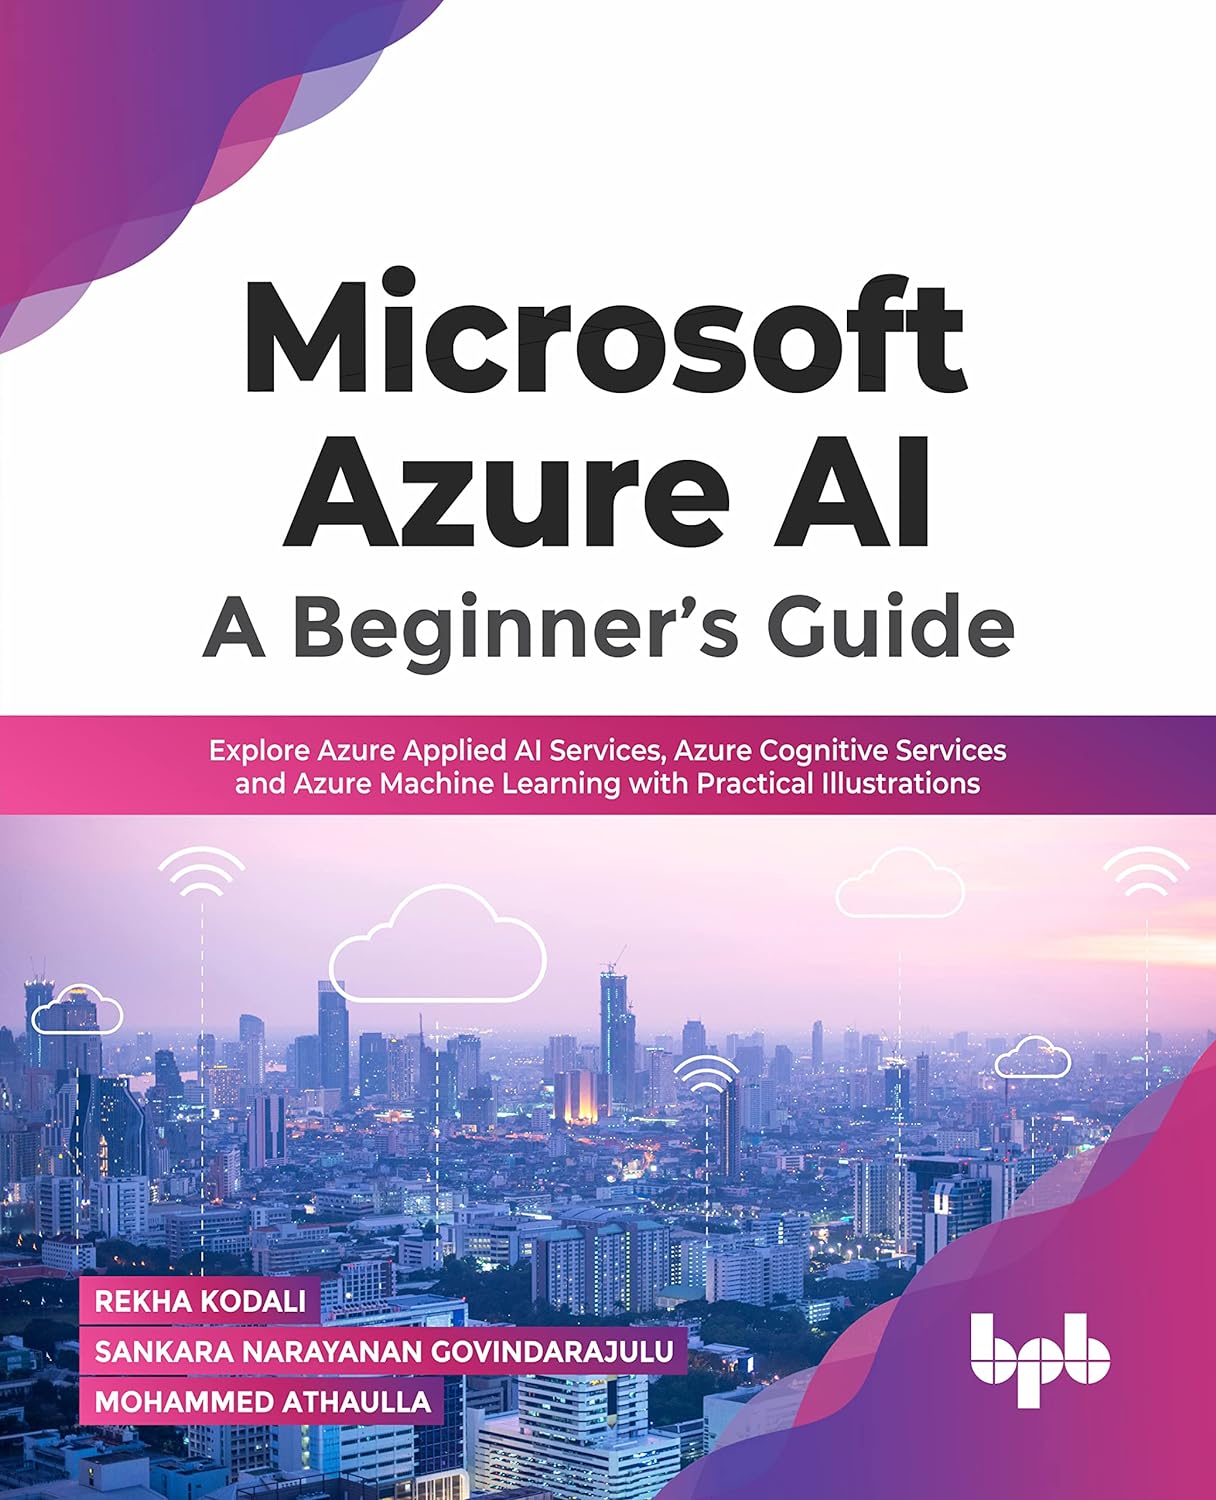 Microsoft Azure AI: A Beginner s Guide: Explore Azure Applied AI Services, Azure Cognitive Services and Azure Machine Learning with Practical Illustrations by Rekha Kodali